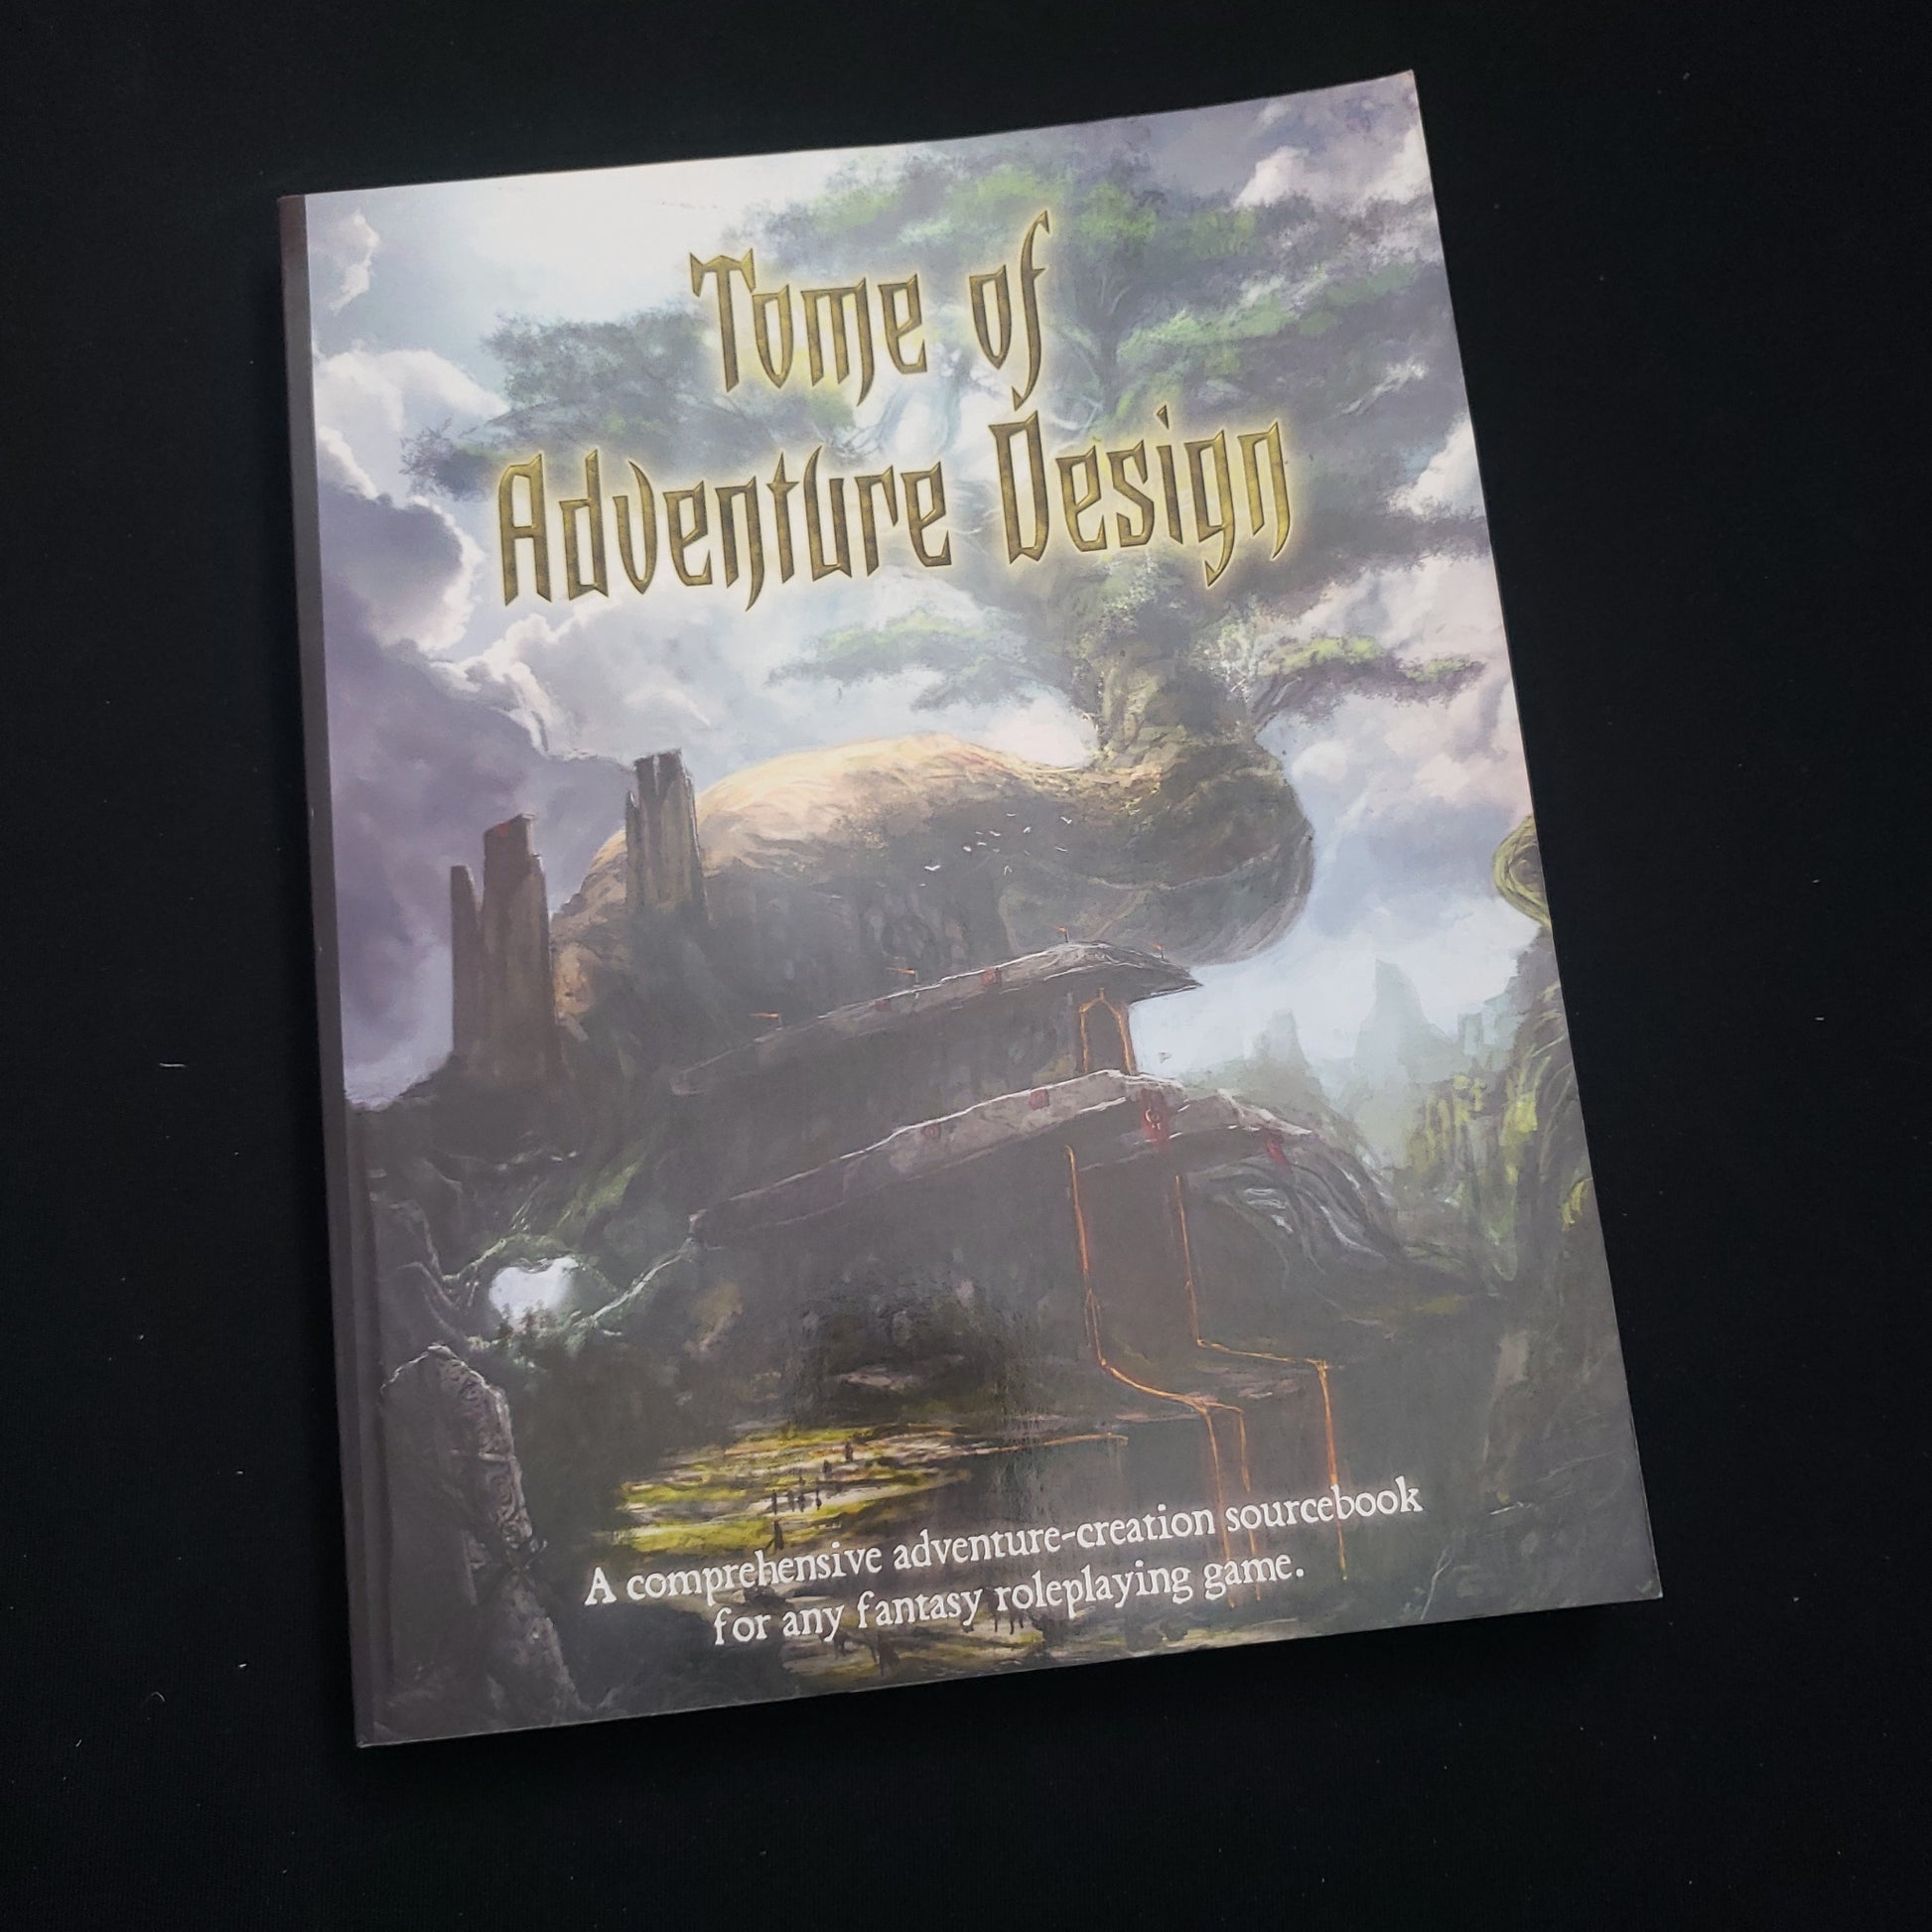 Image shows the front cover of the Tome of Adventure Design roleplaying game book